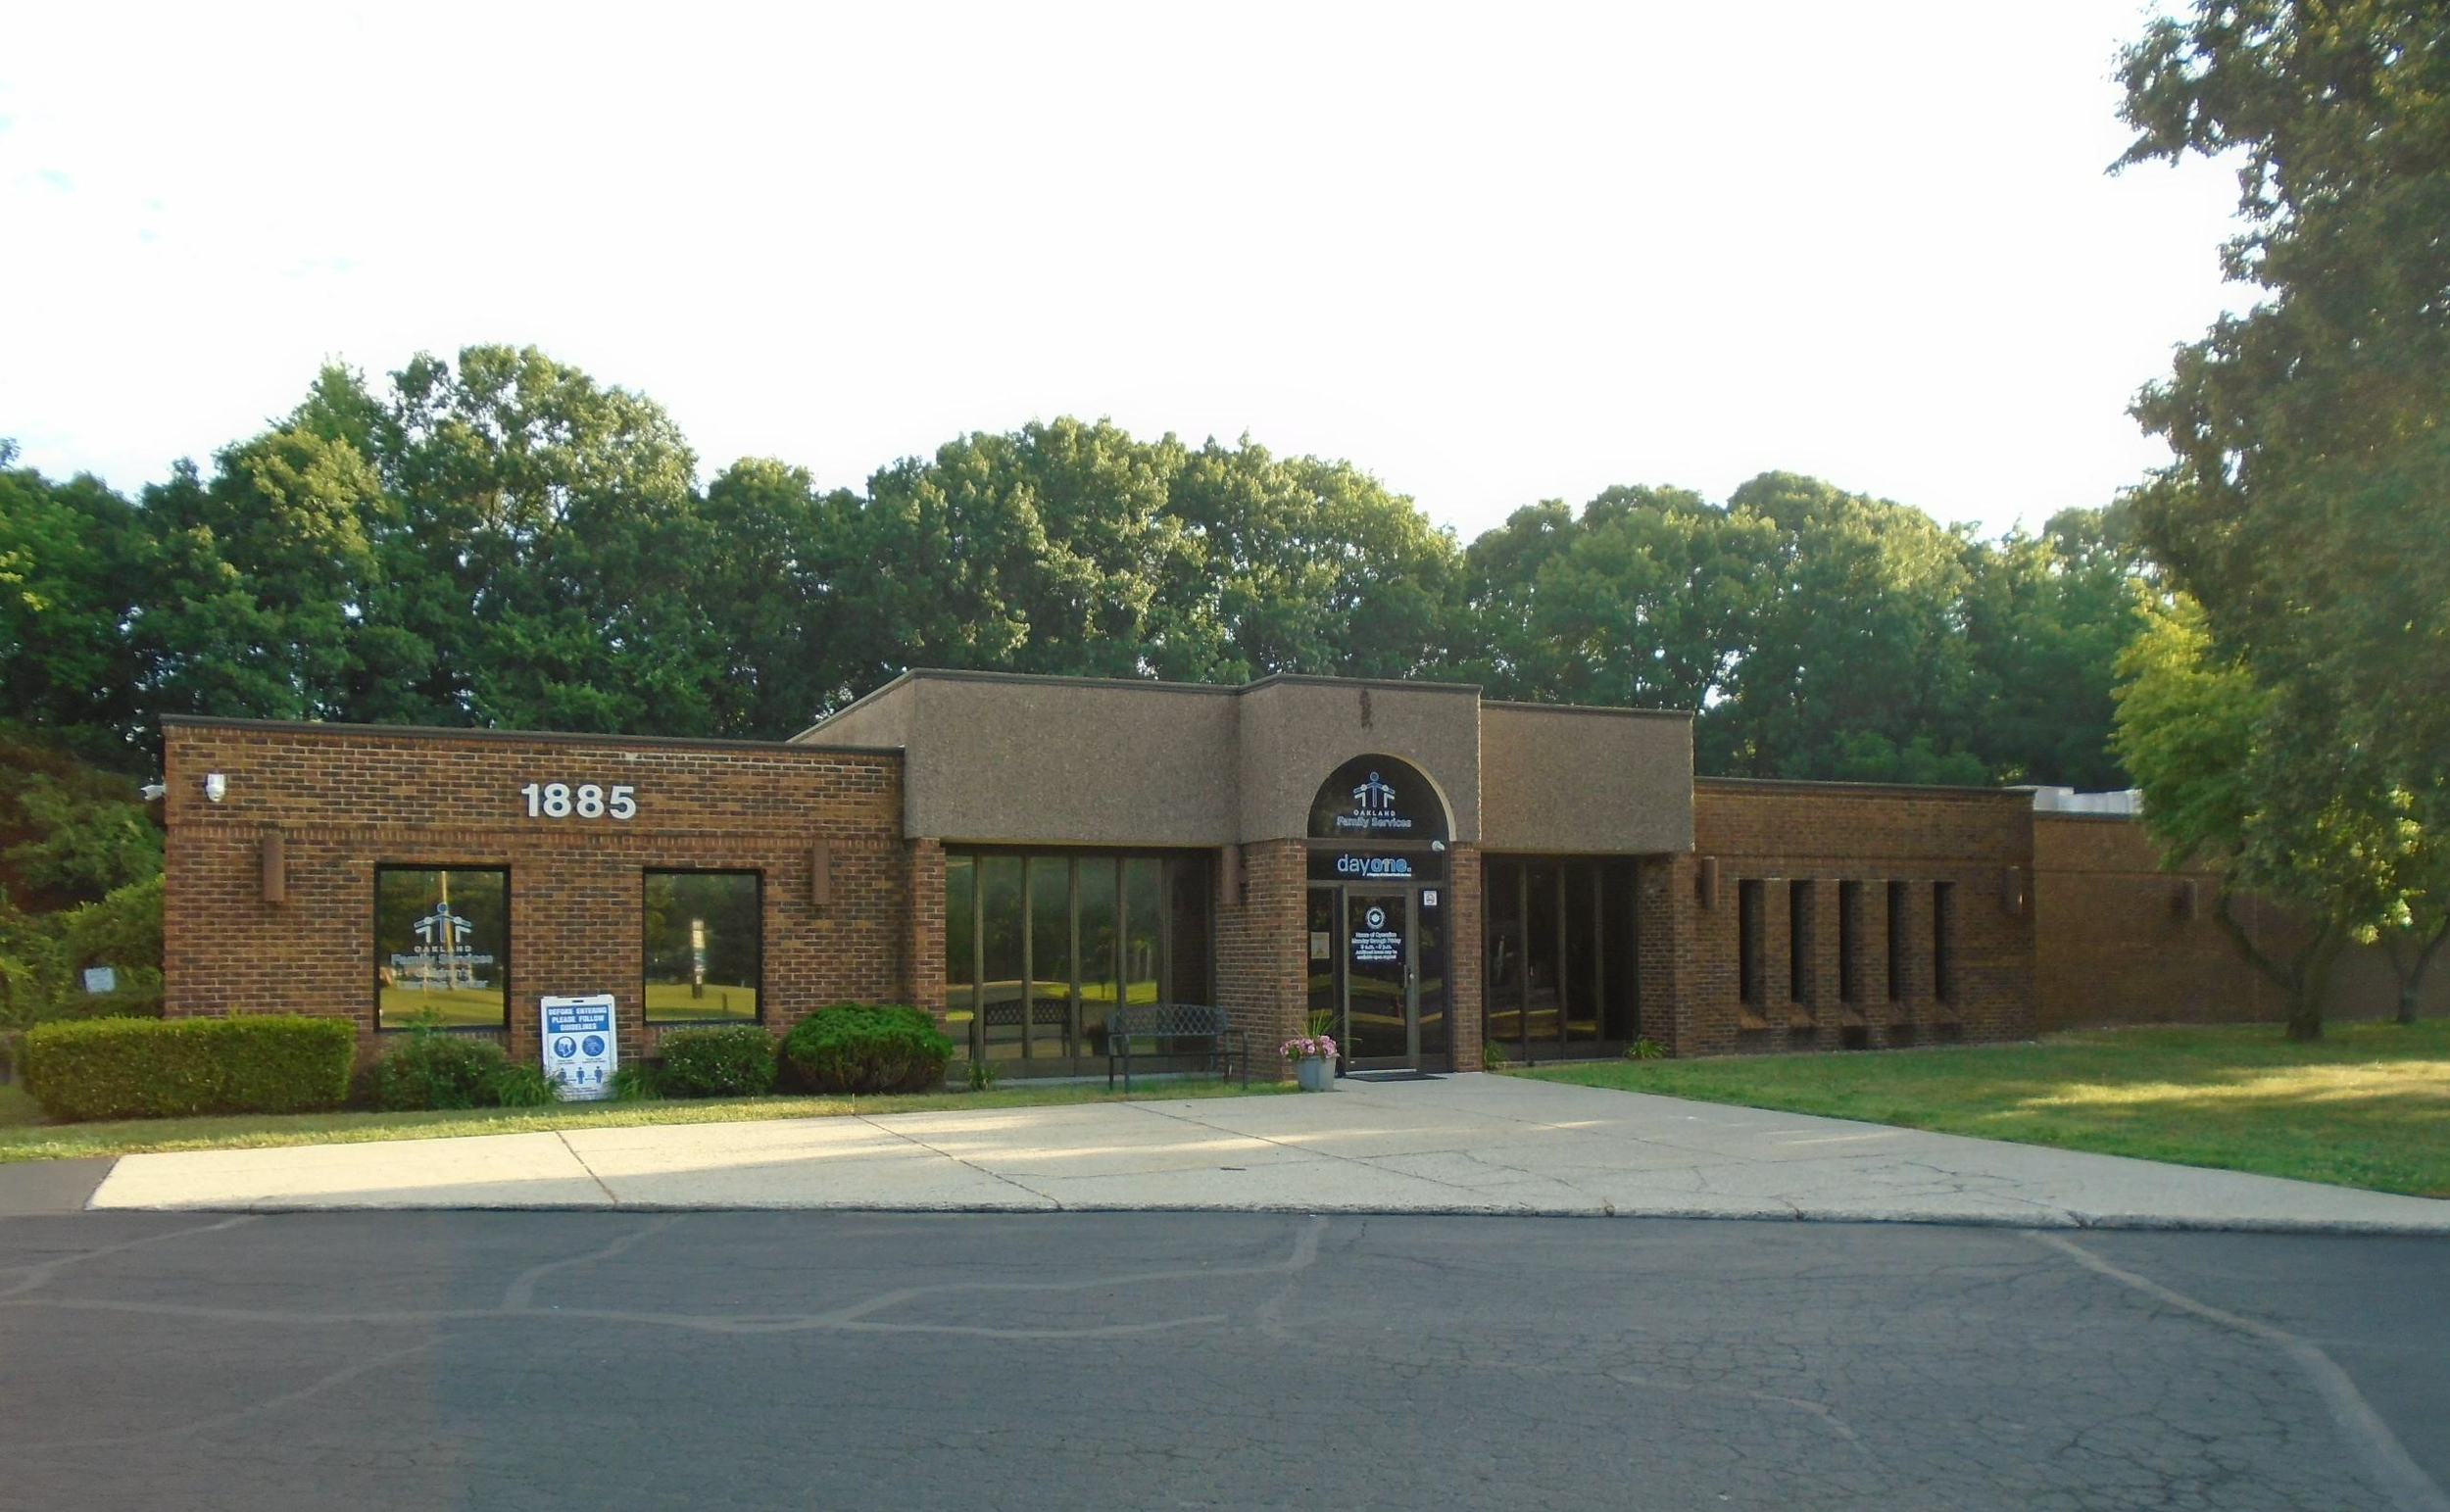  Our Walled Lake Children’s Learning Center is located at 1885 N. Pontiac Trail, Walled Lake, MI 48390. 